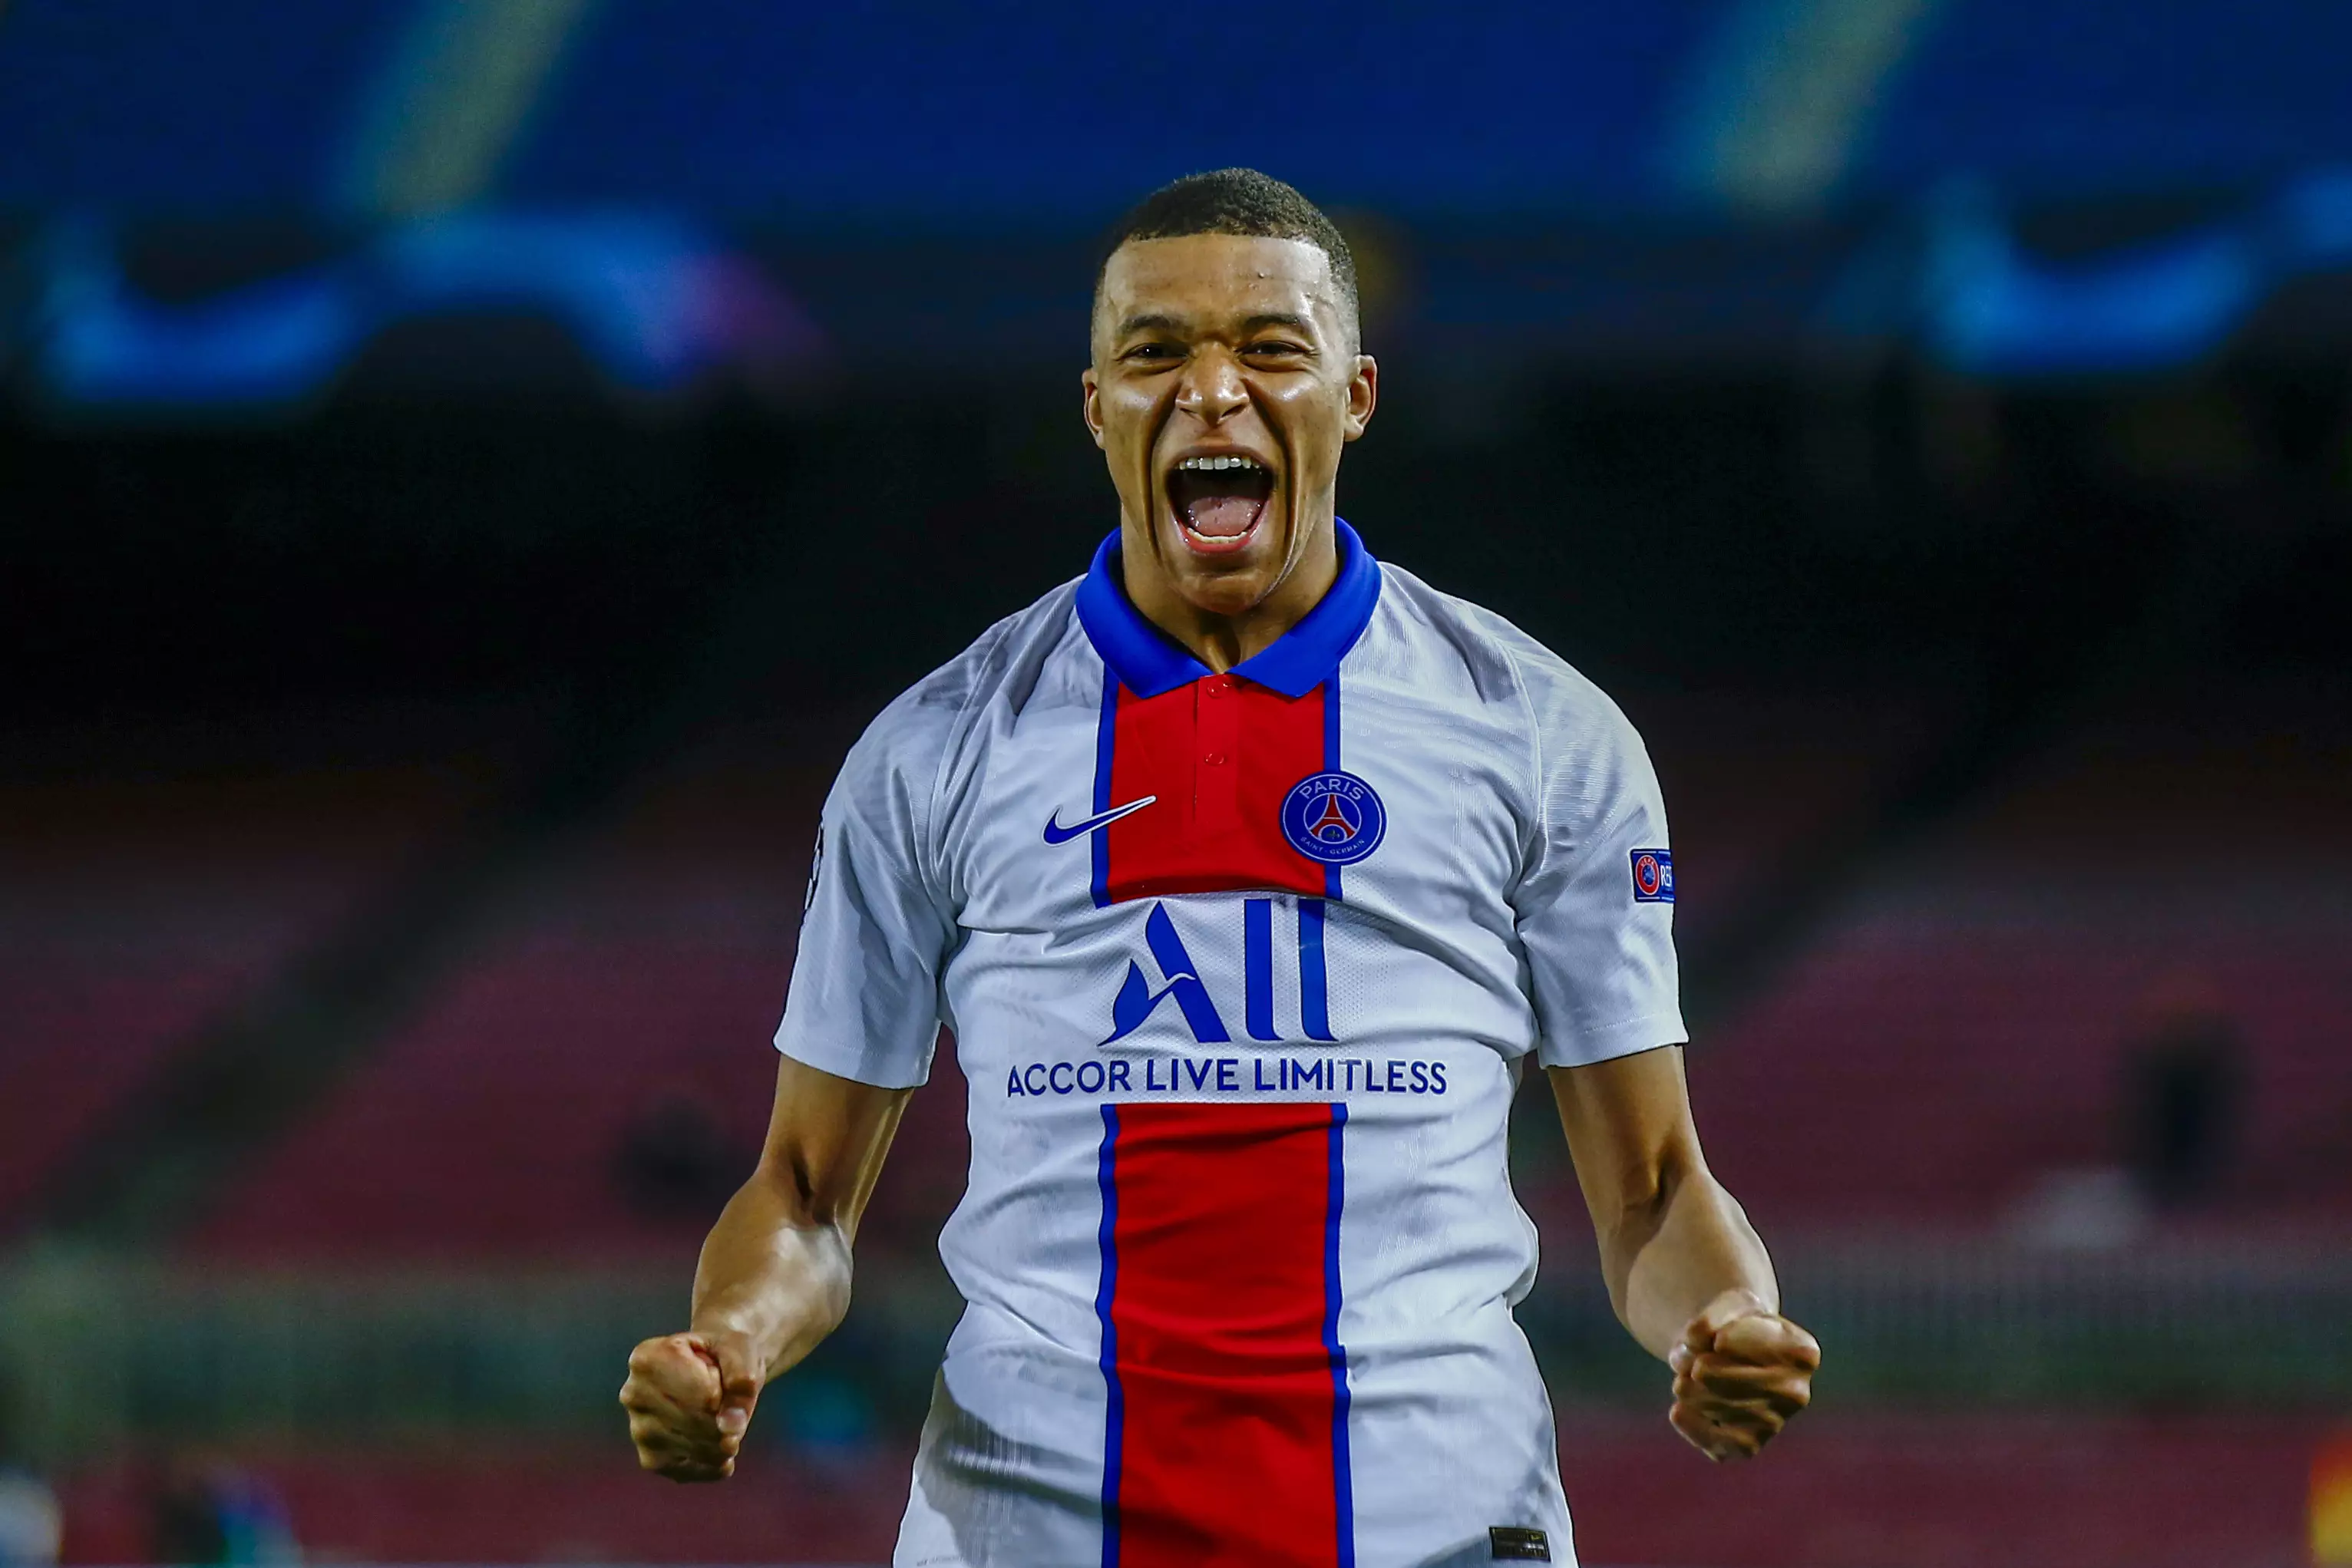 Real are hoping to sign Mbappe. Image: PA Images